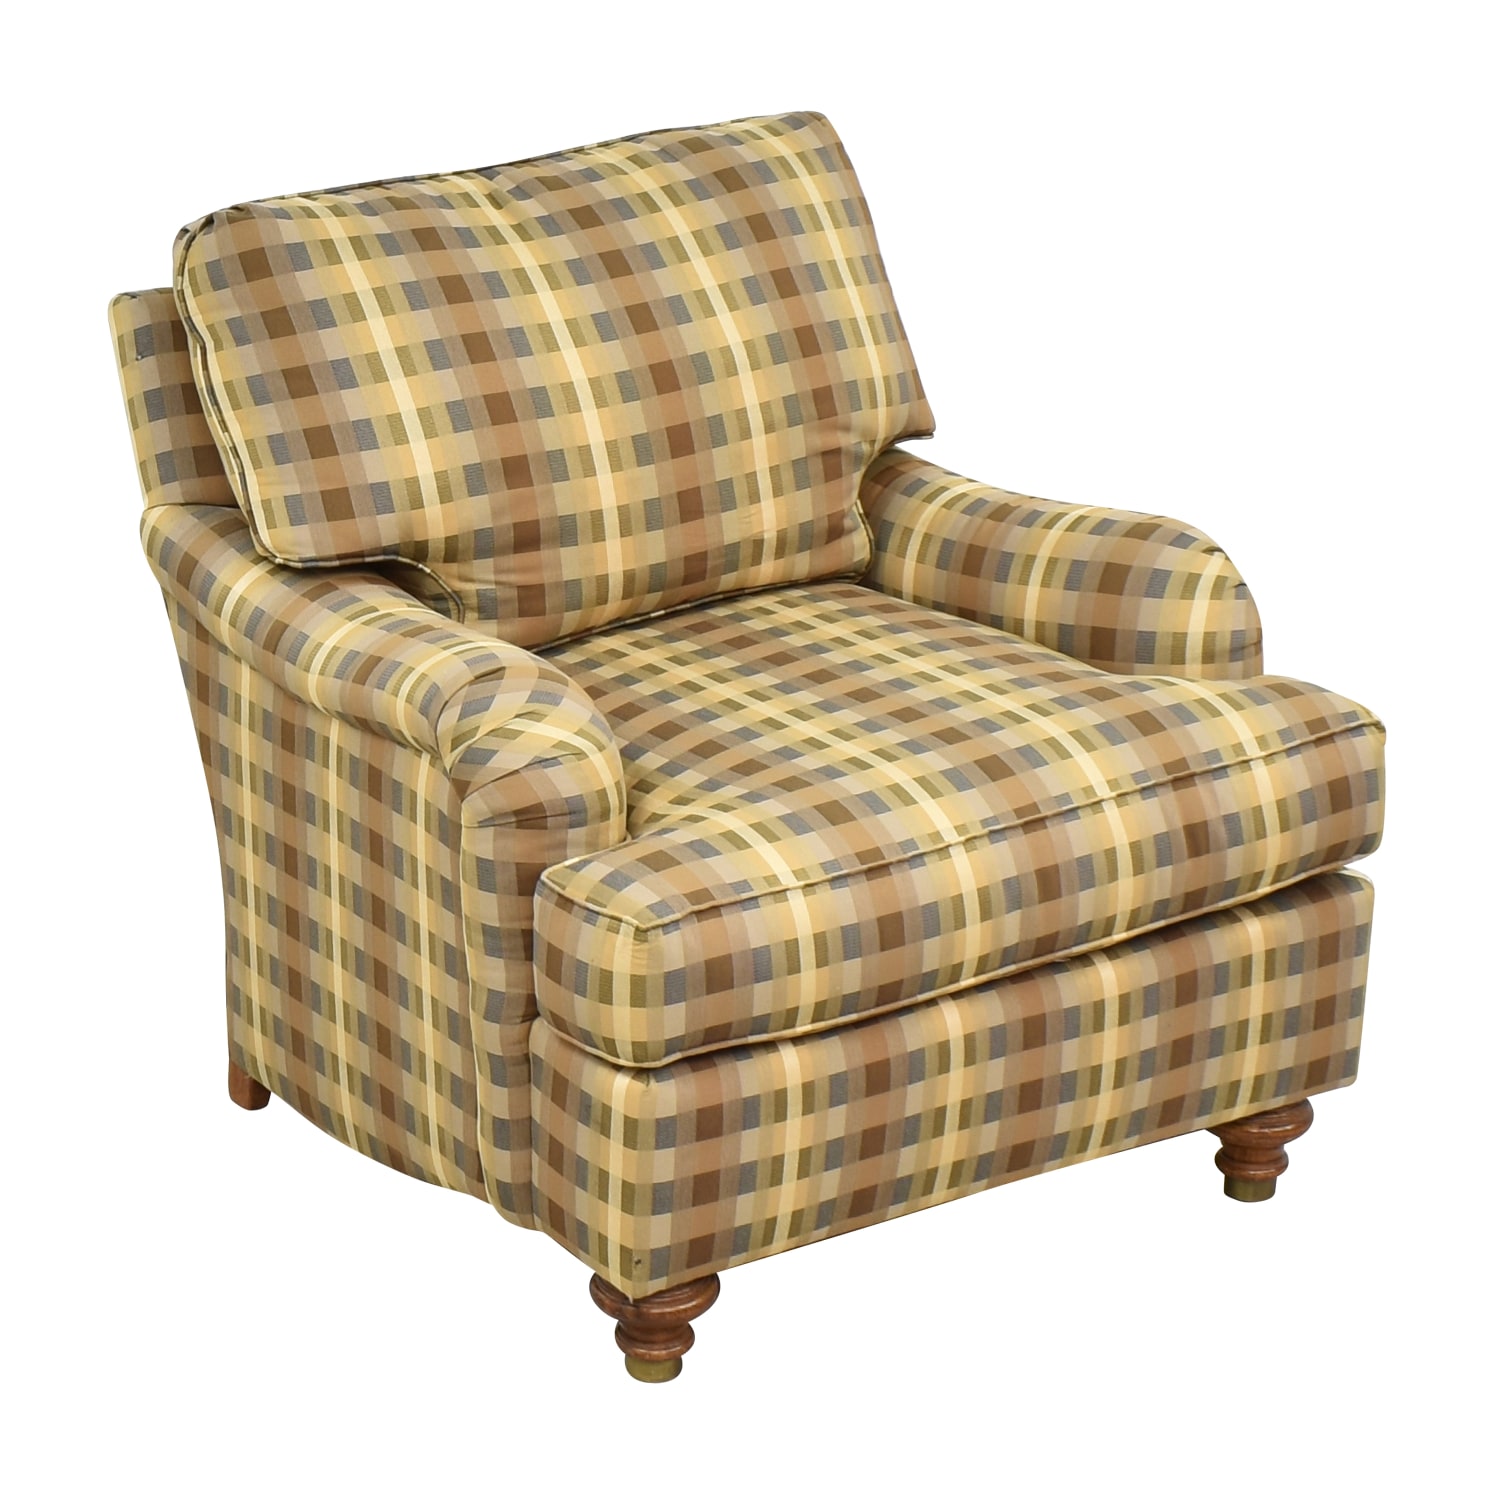 Taylor King Taylor King Custom Upholstered Chair discount